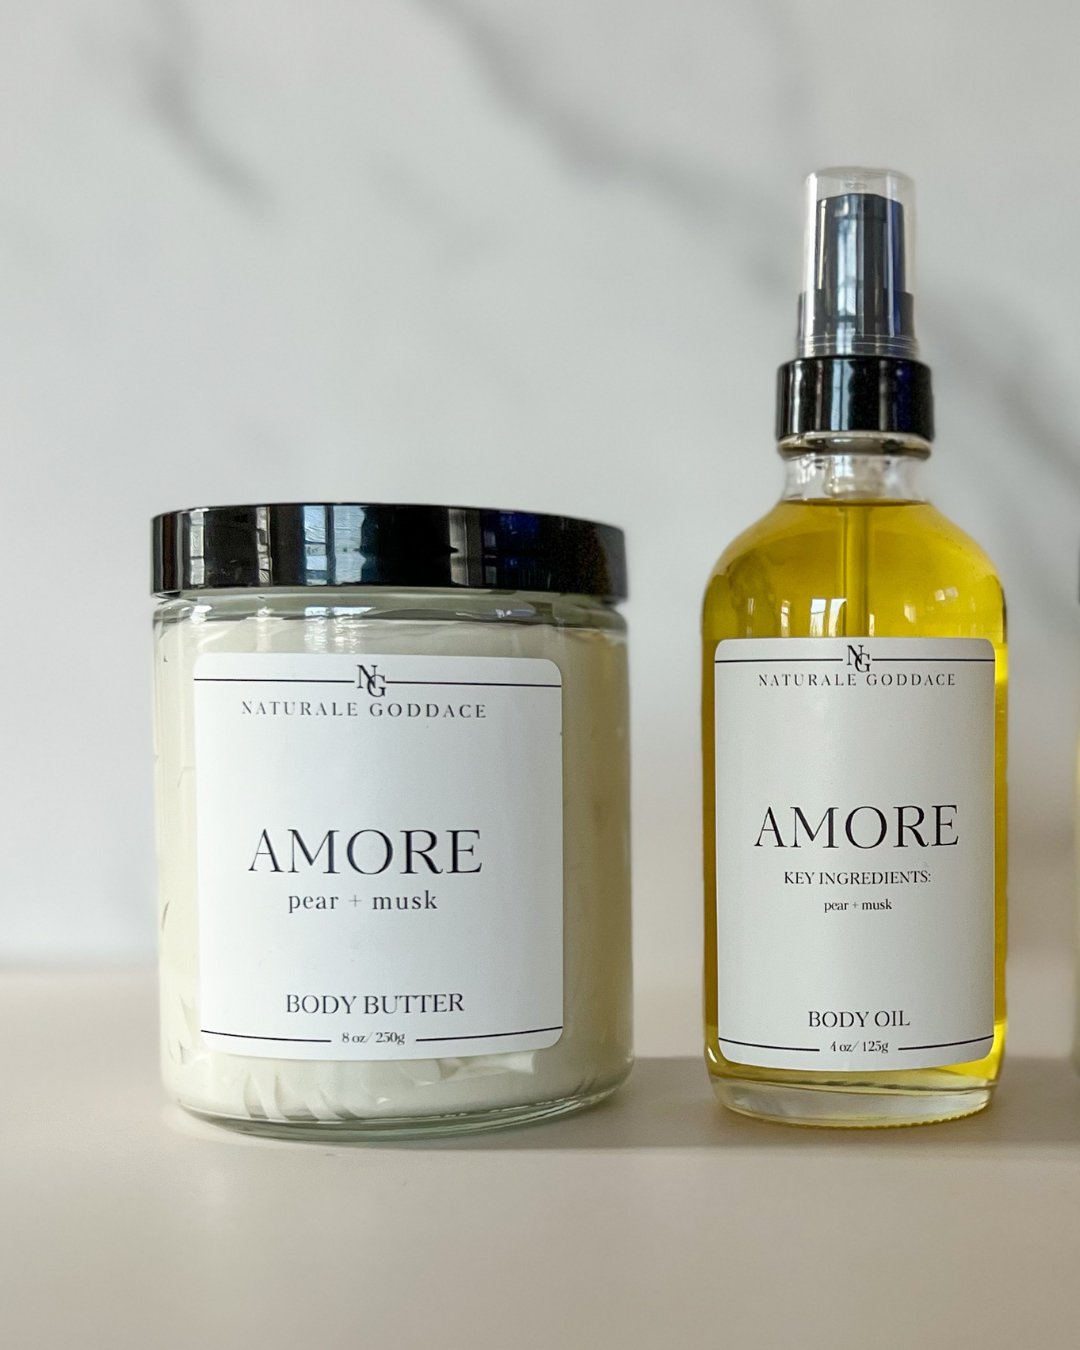 Amore Body Butter + Body Oil - Naturale Goddace | Clean + simple skincare-Bath & Body Set